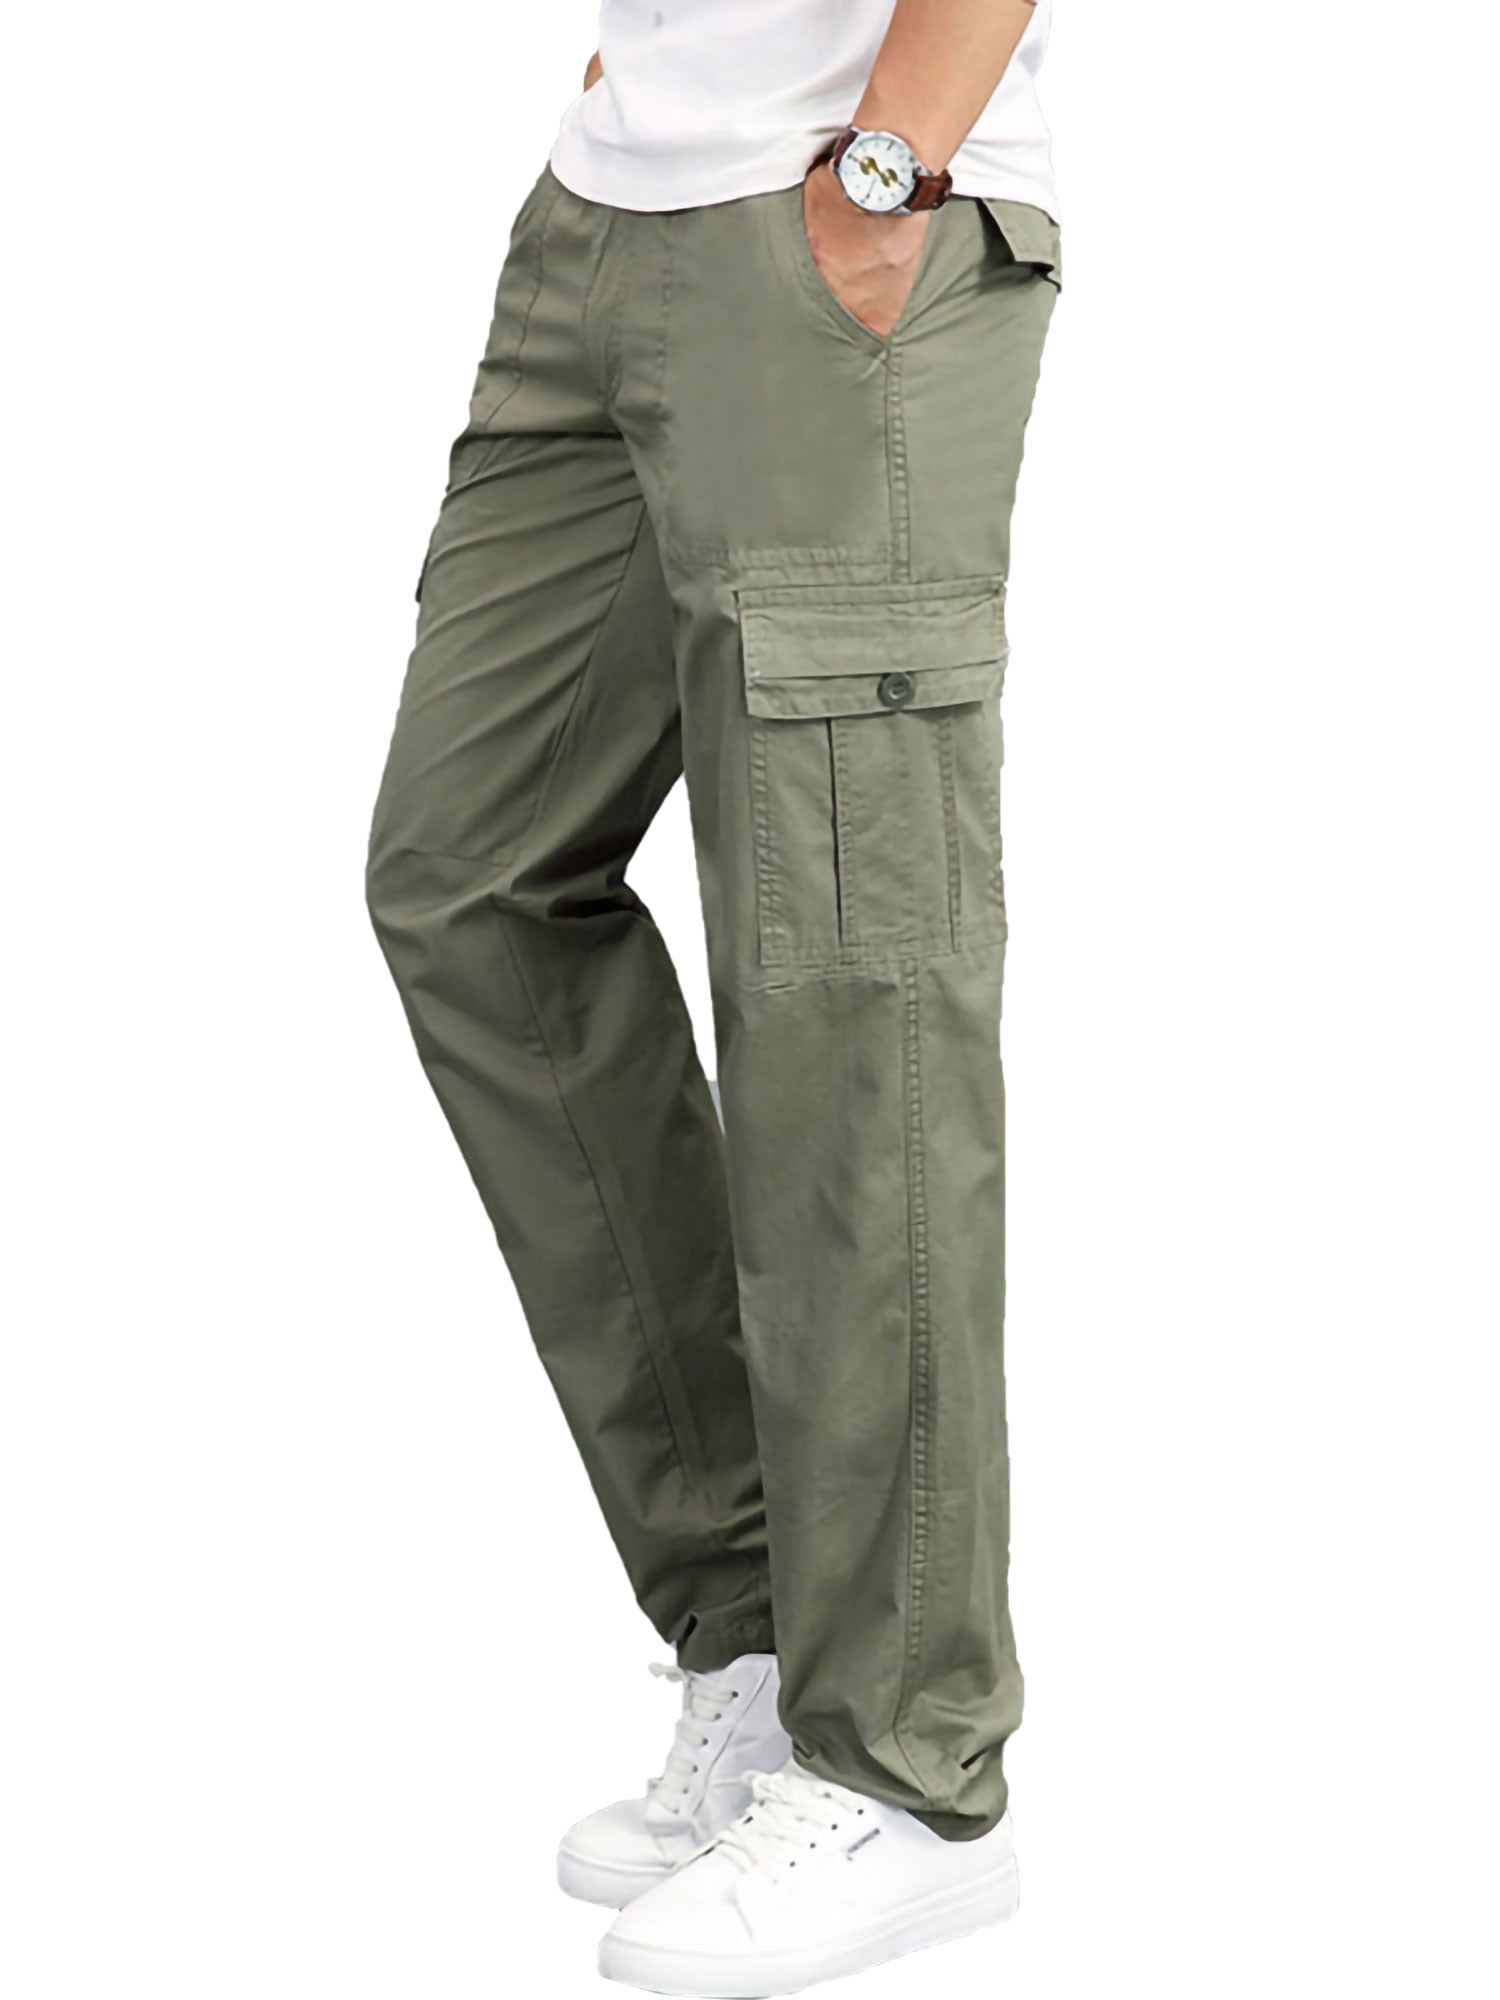 Mens Cargo Combat Work Trousers Army Slim Fit Elastic Waist Casual Bottoms Pants 